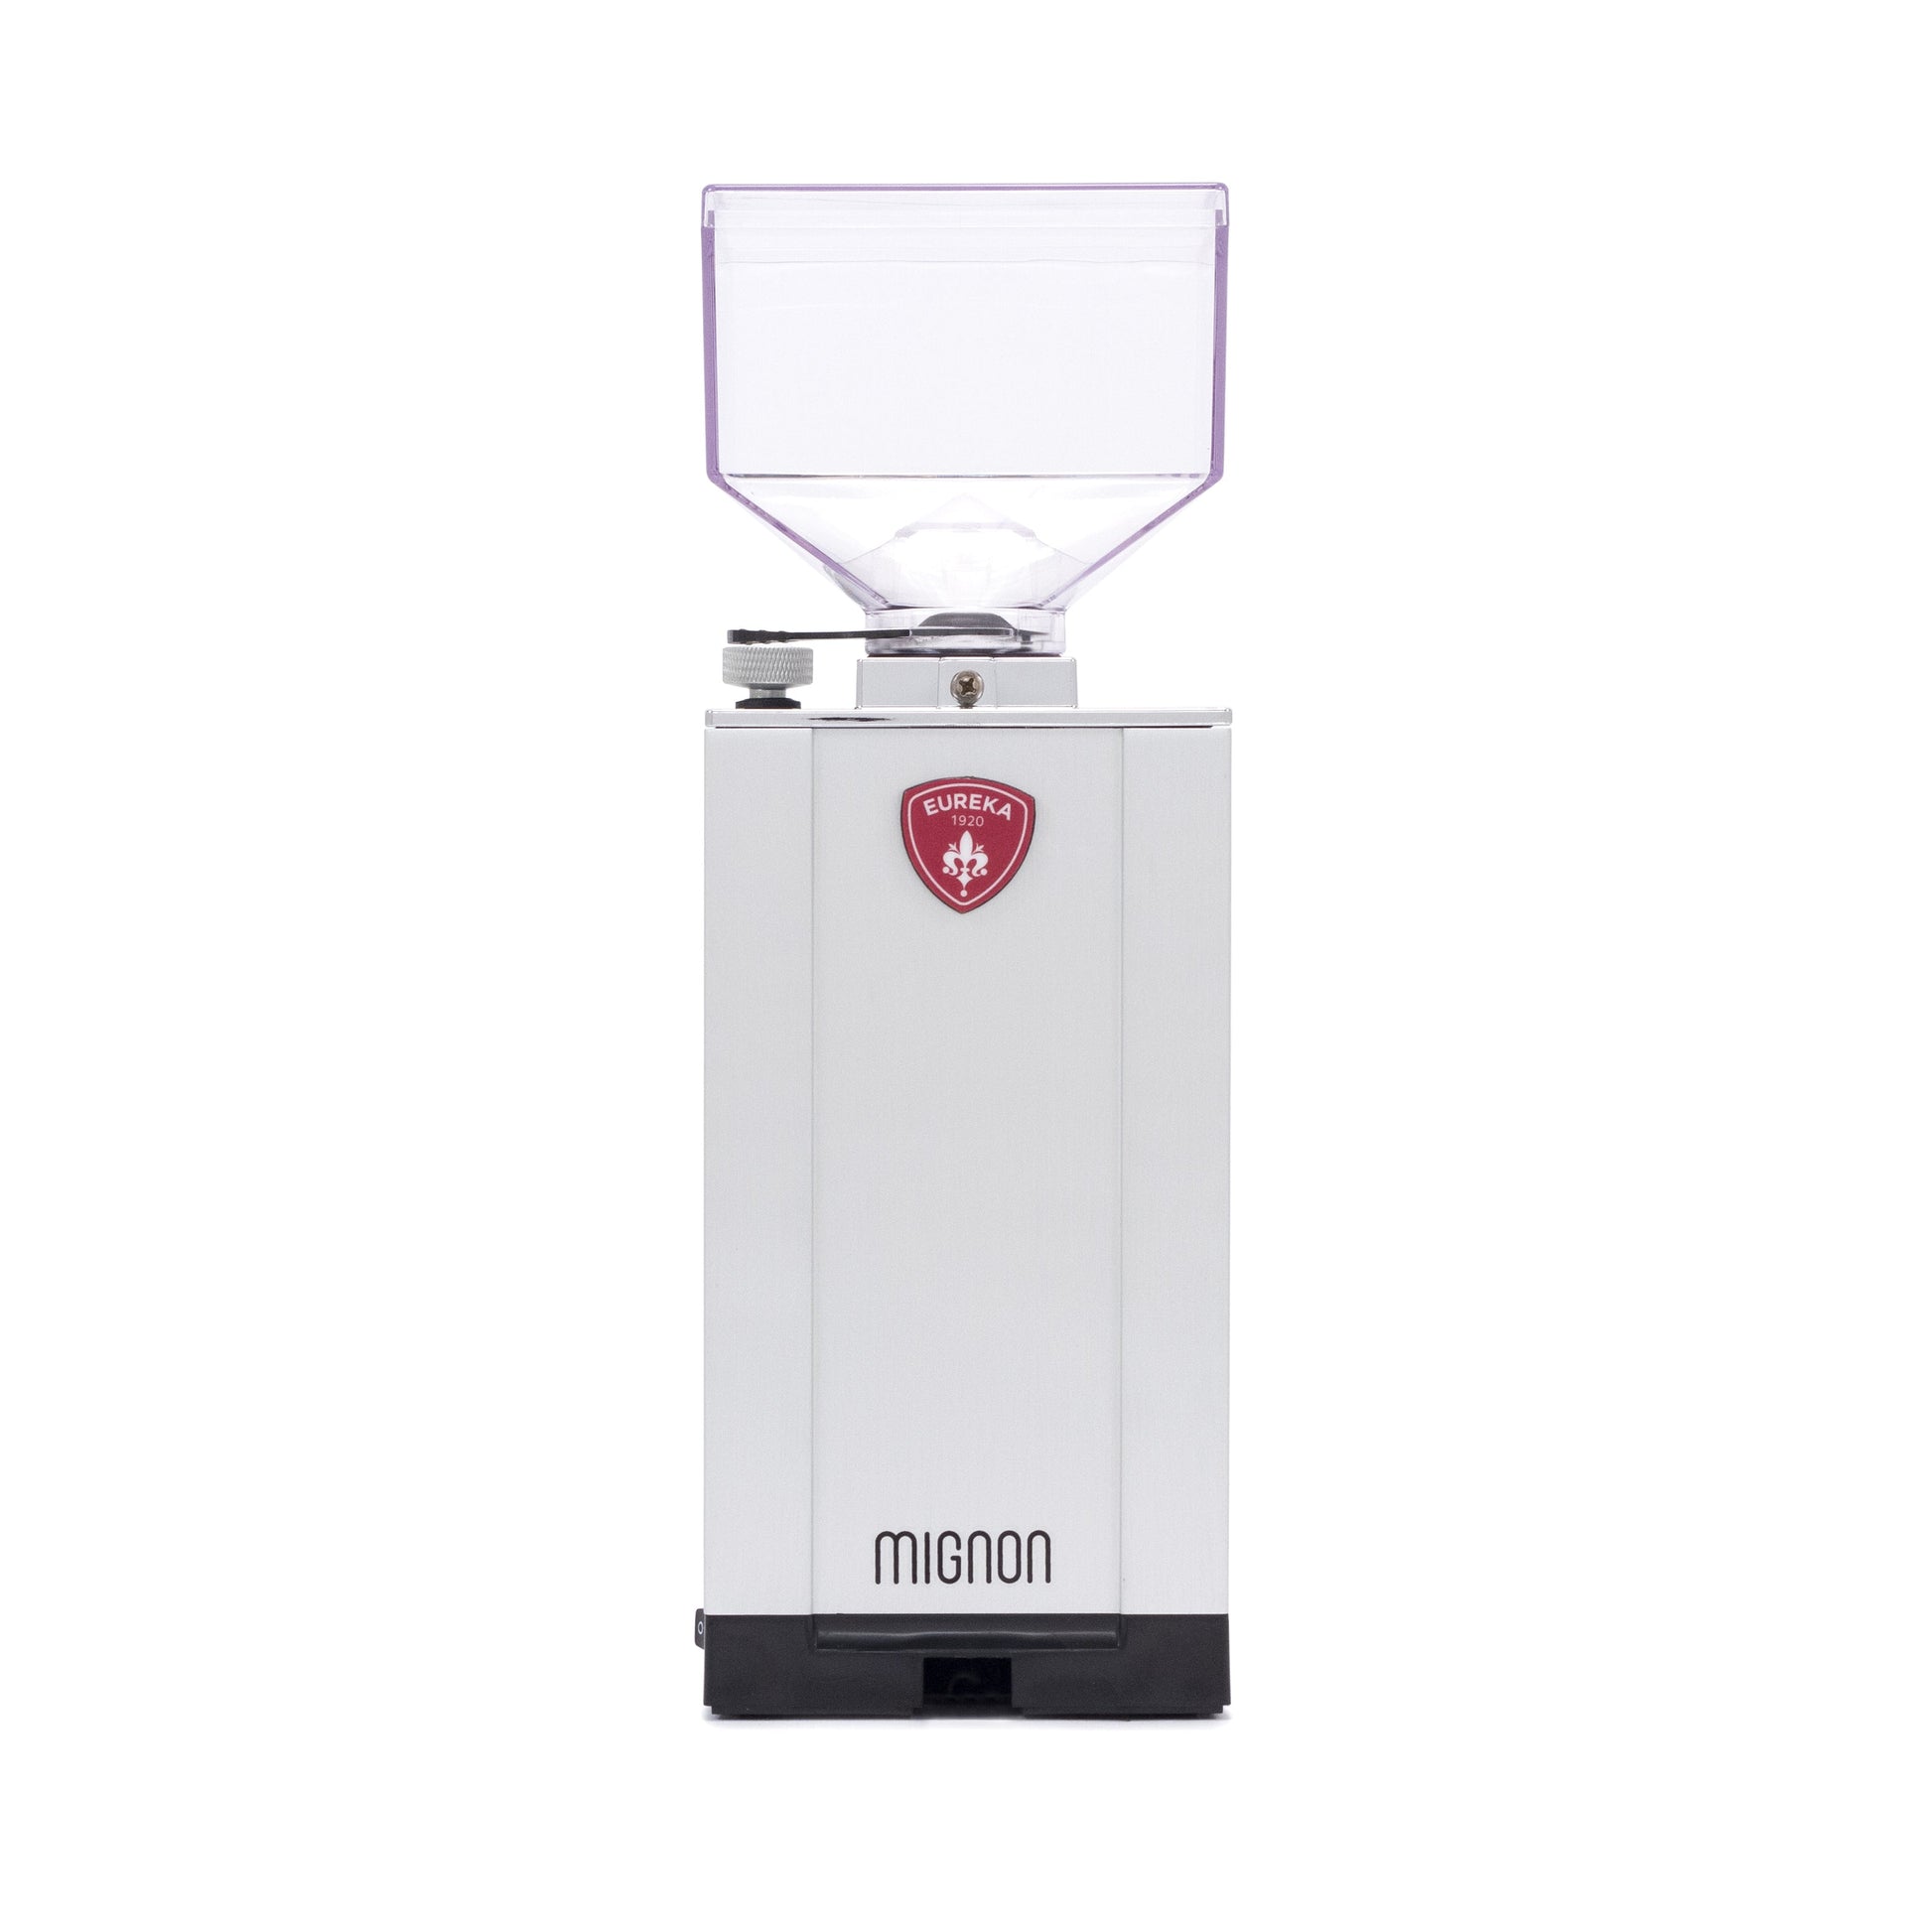 Eureka Mignon Magnifico Coffee Grinder in Polished Natural Silver Rear Facing || polished natural silver